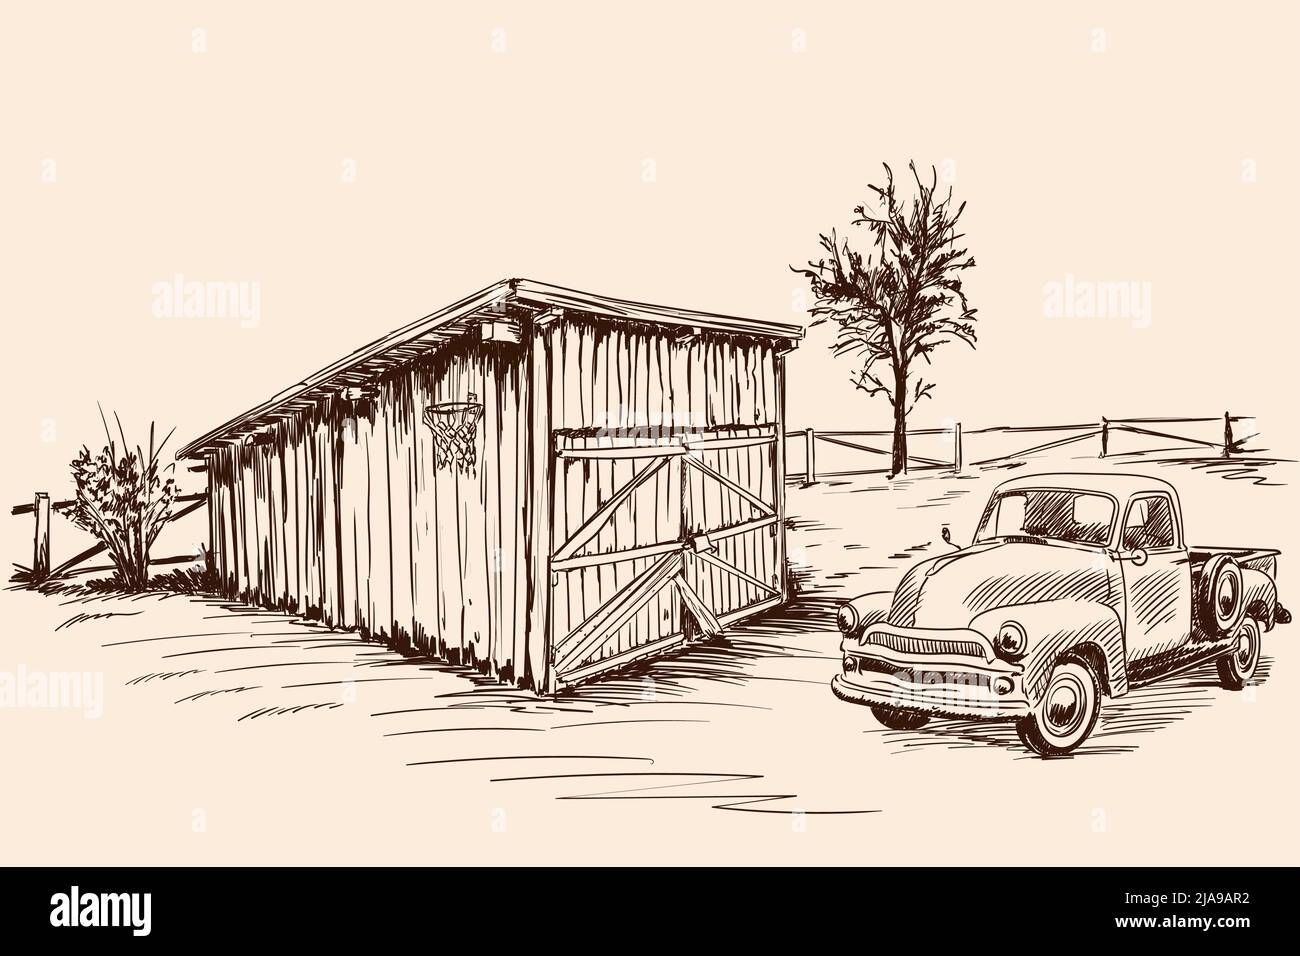 Rural landscape with a farm wagon next to an old barn with a closed gate. Hand sketch on a beige background. Stock Vector